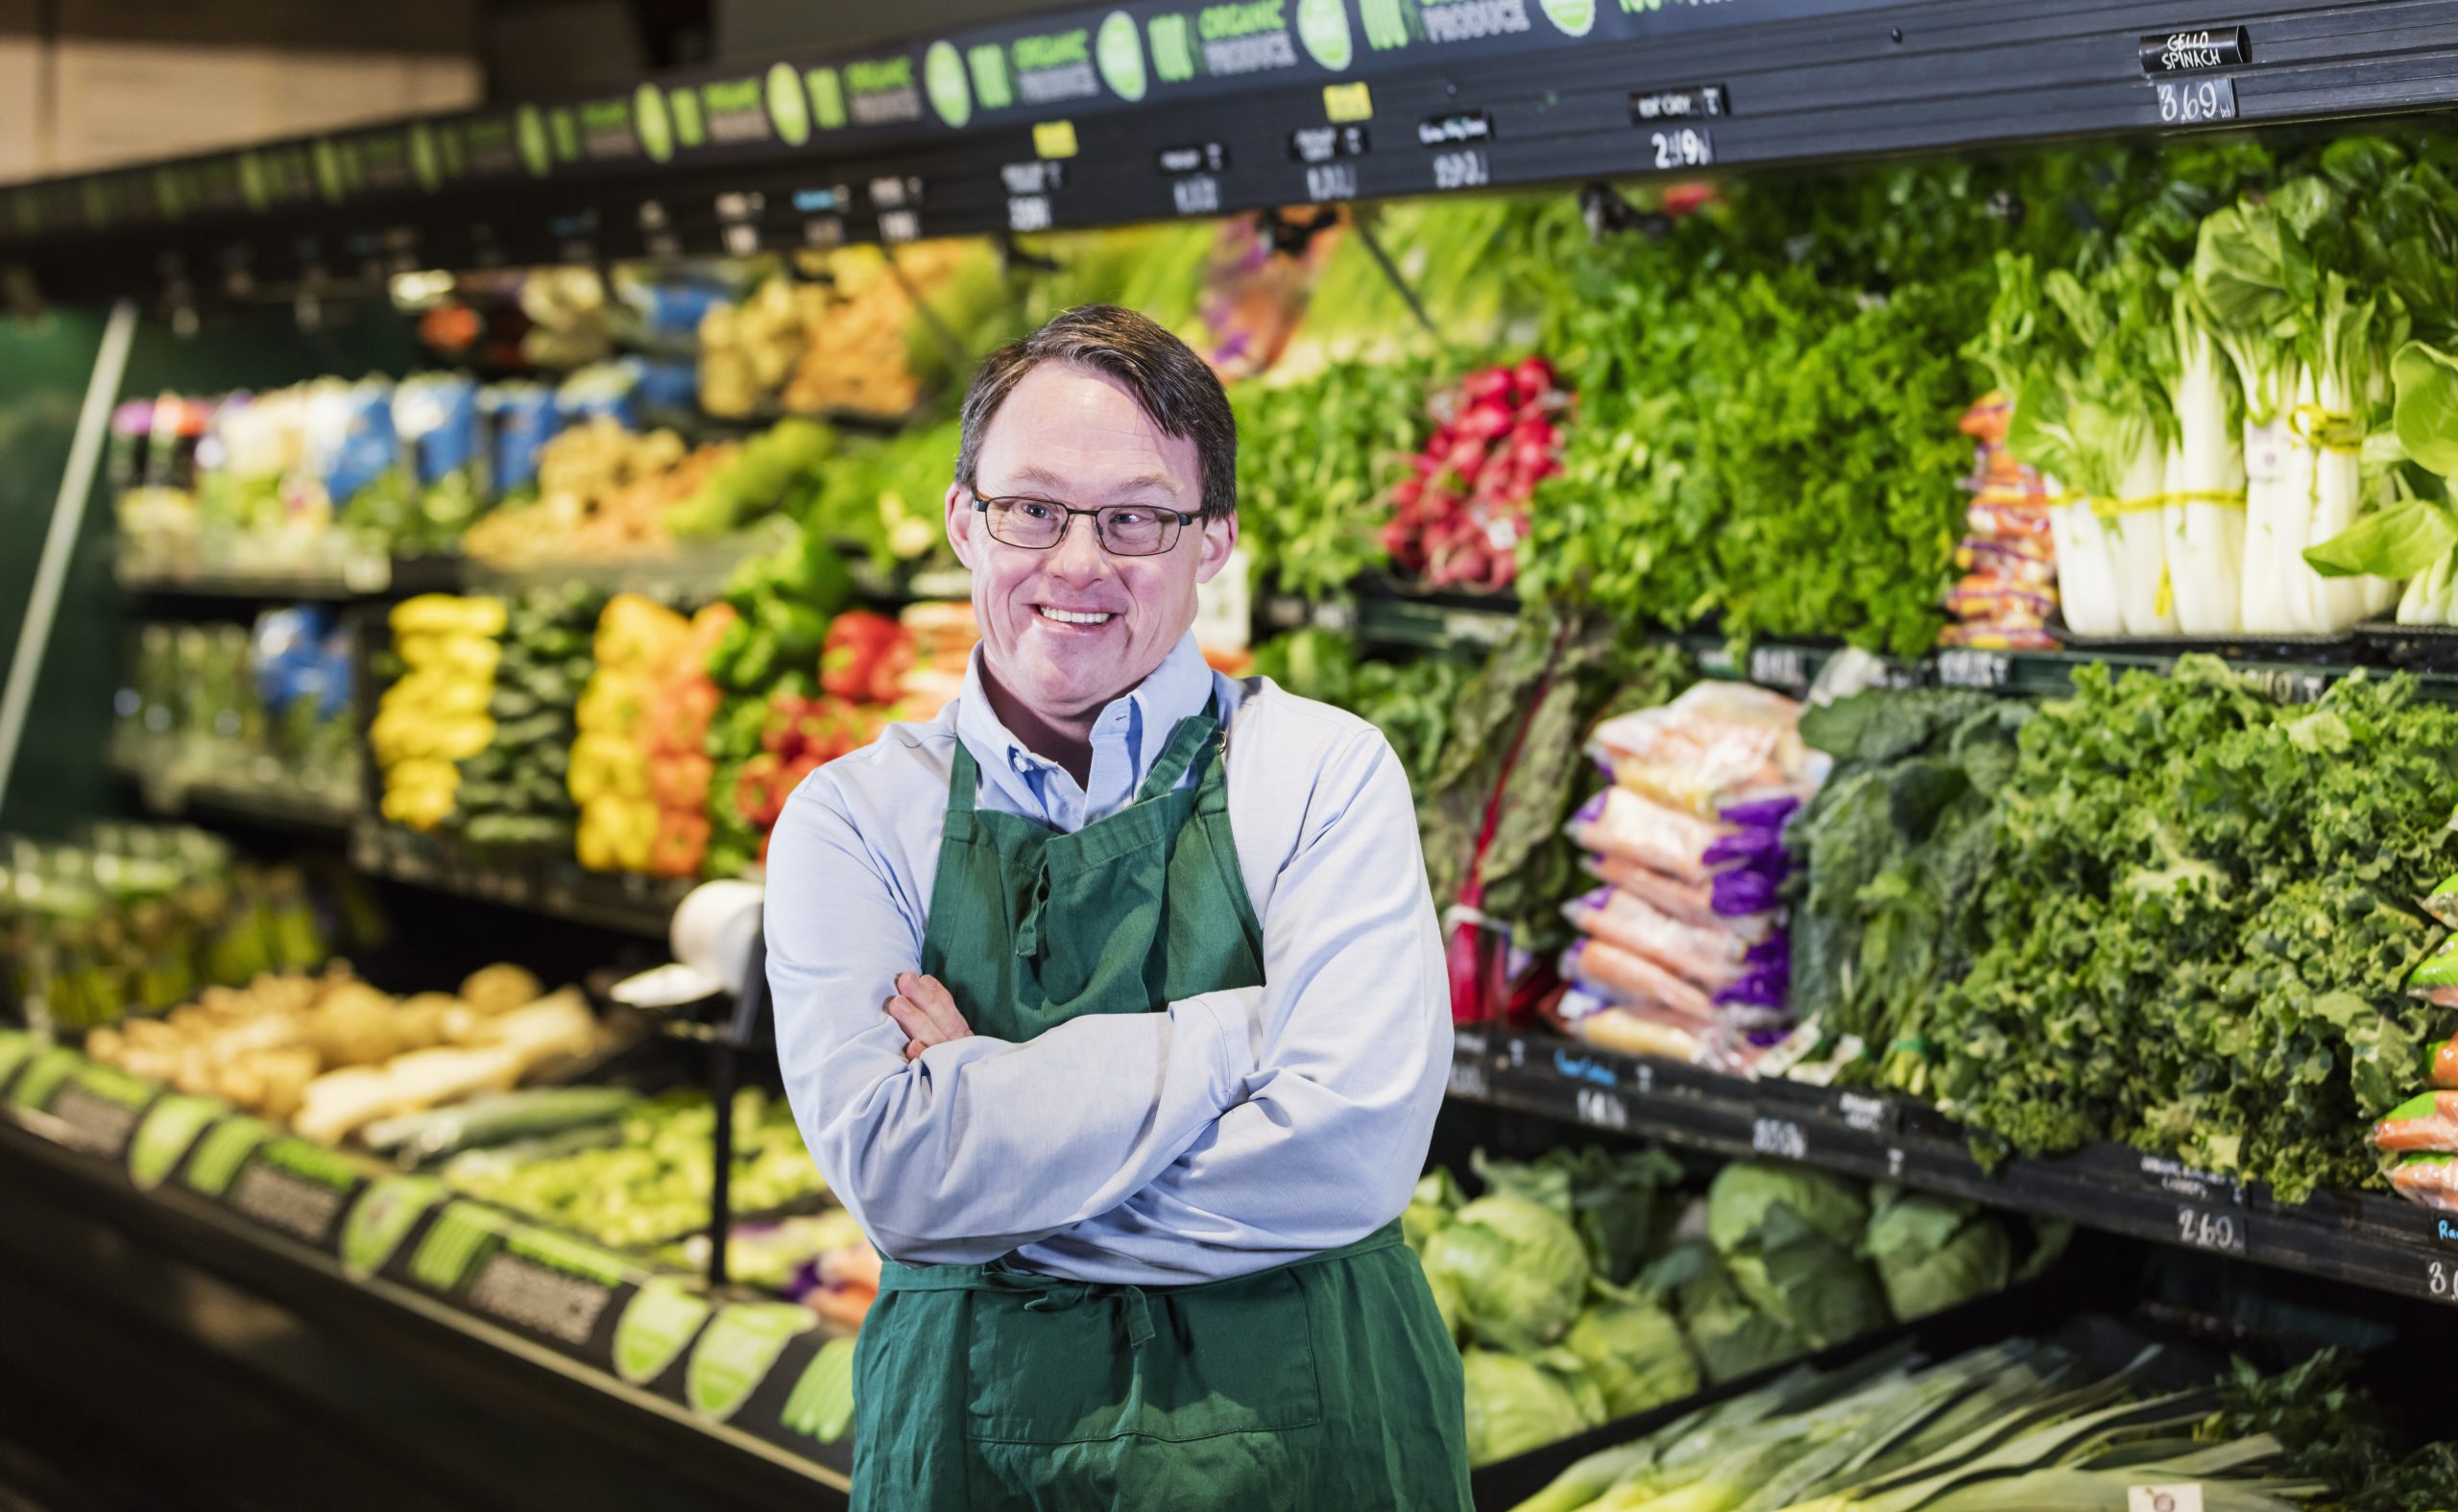 image: a man with light skin and dark hair, with obvious disabilities wearing a formal shirt and an apron in front of a vegetable wall in a market setting